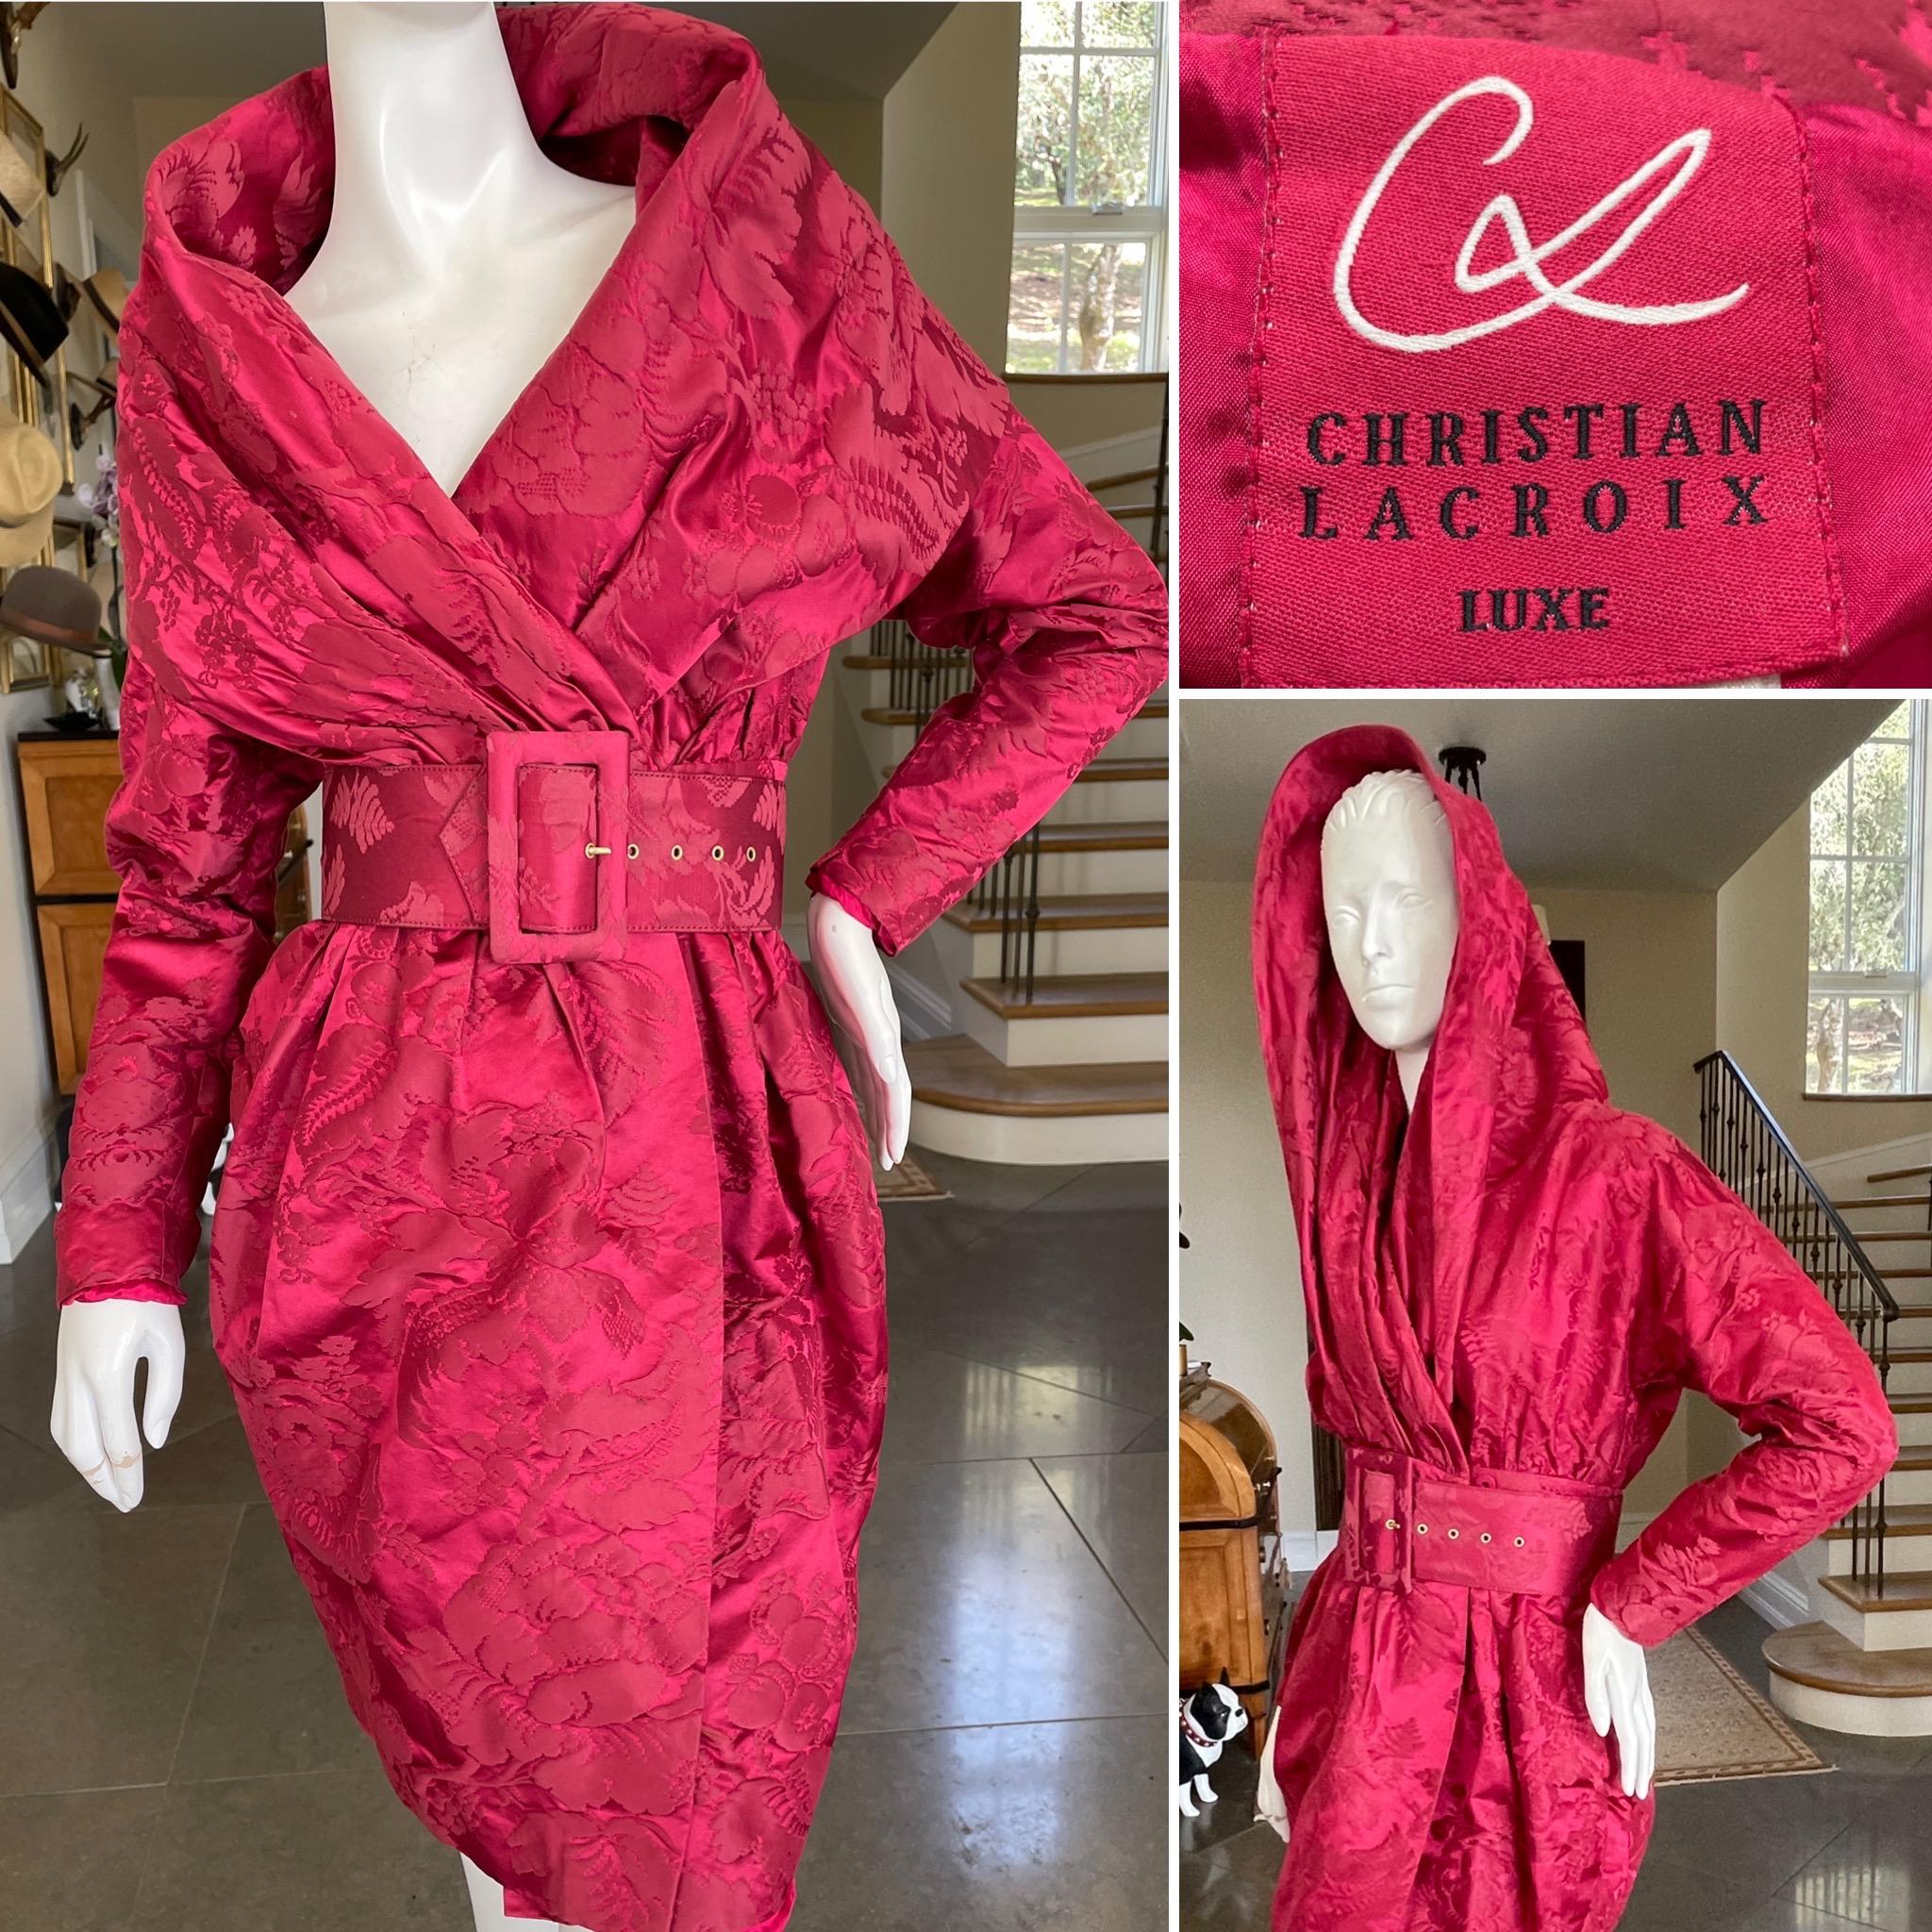 Christian Lacroix Luxe Collection 1988 Red Jacquard Belted Dress with Portrait Neckline.
Lacroix’s Luxe collection premiered in 1988, a season before his ready to wear, and was priced from $3500-$12,000 , below his Haute Couture collection but